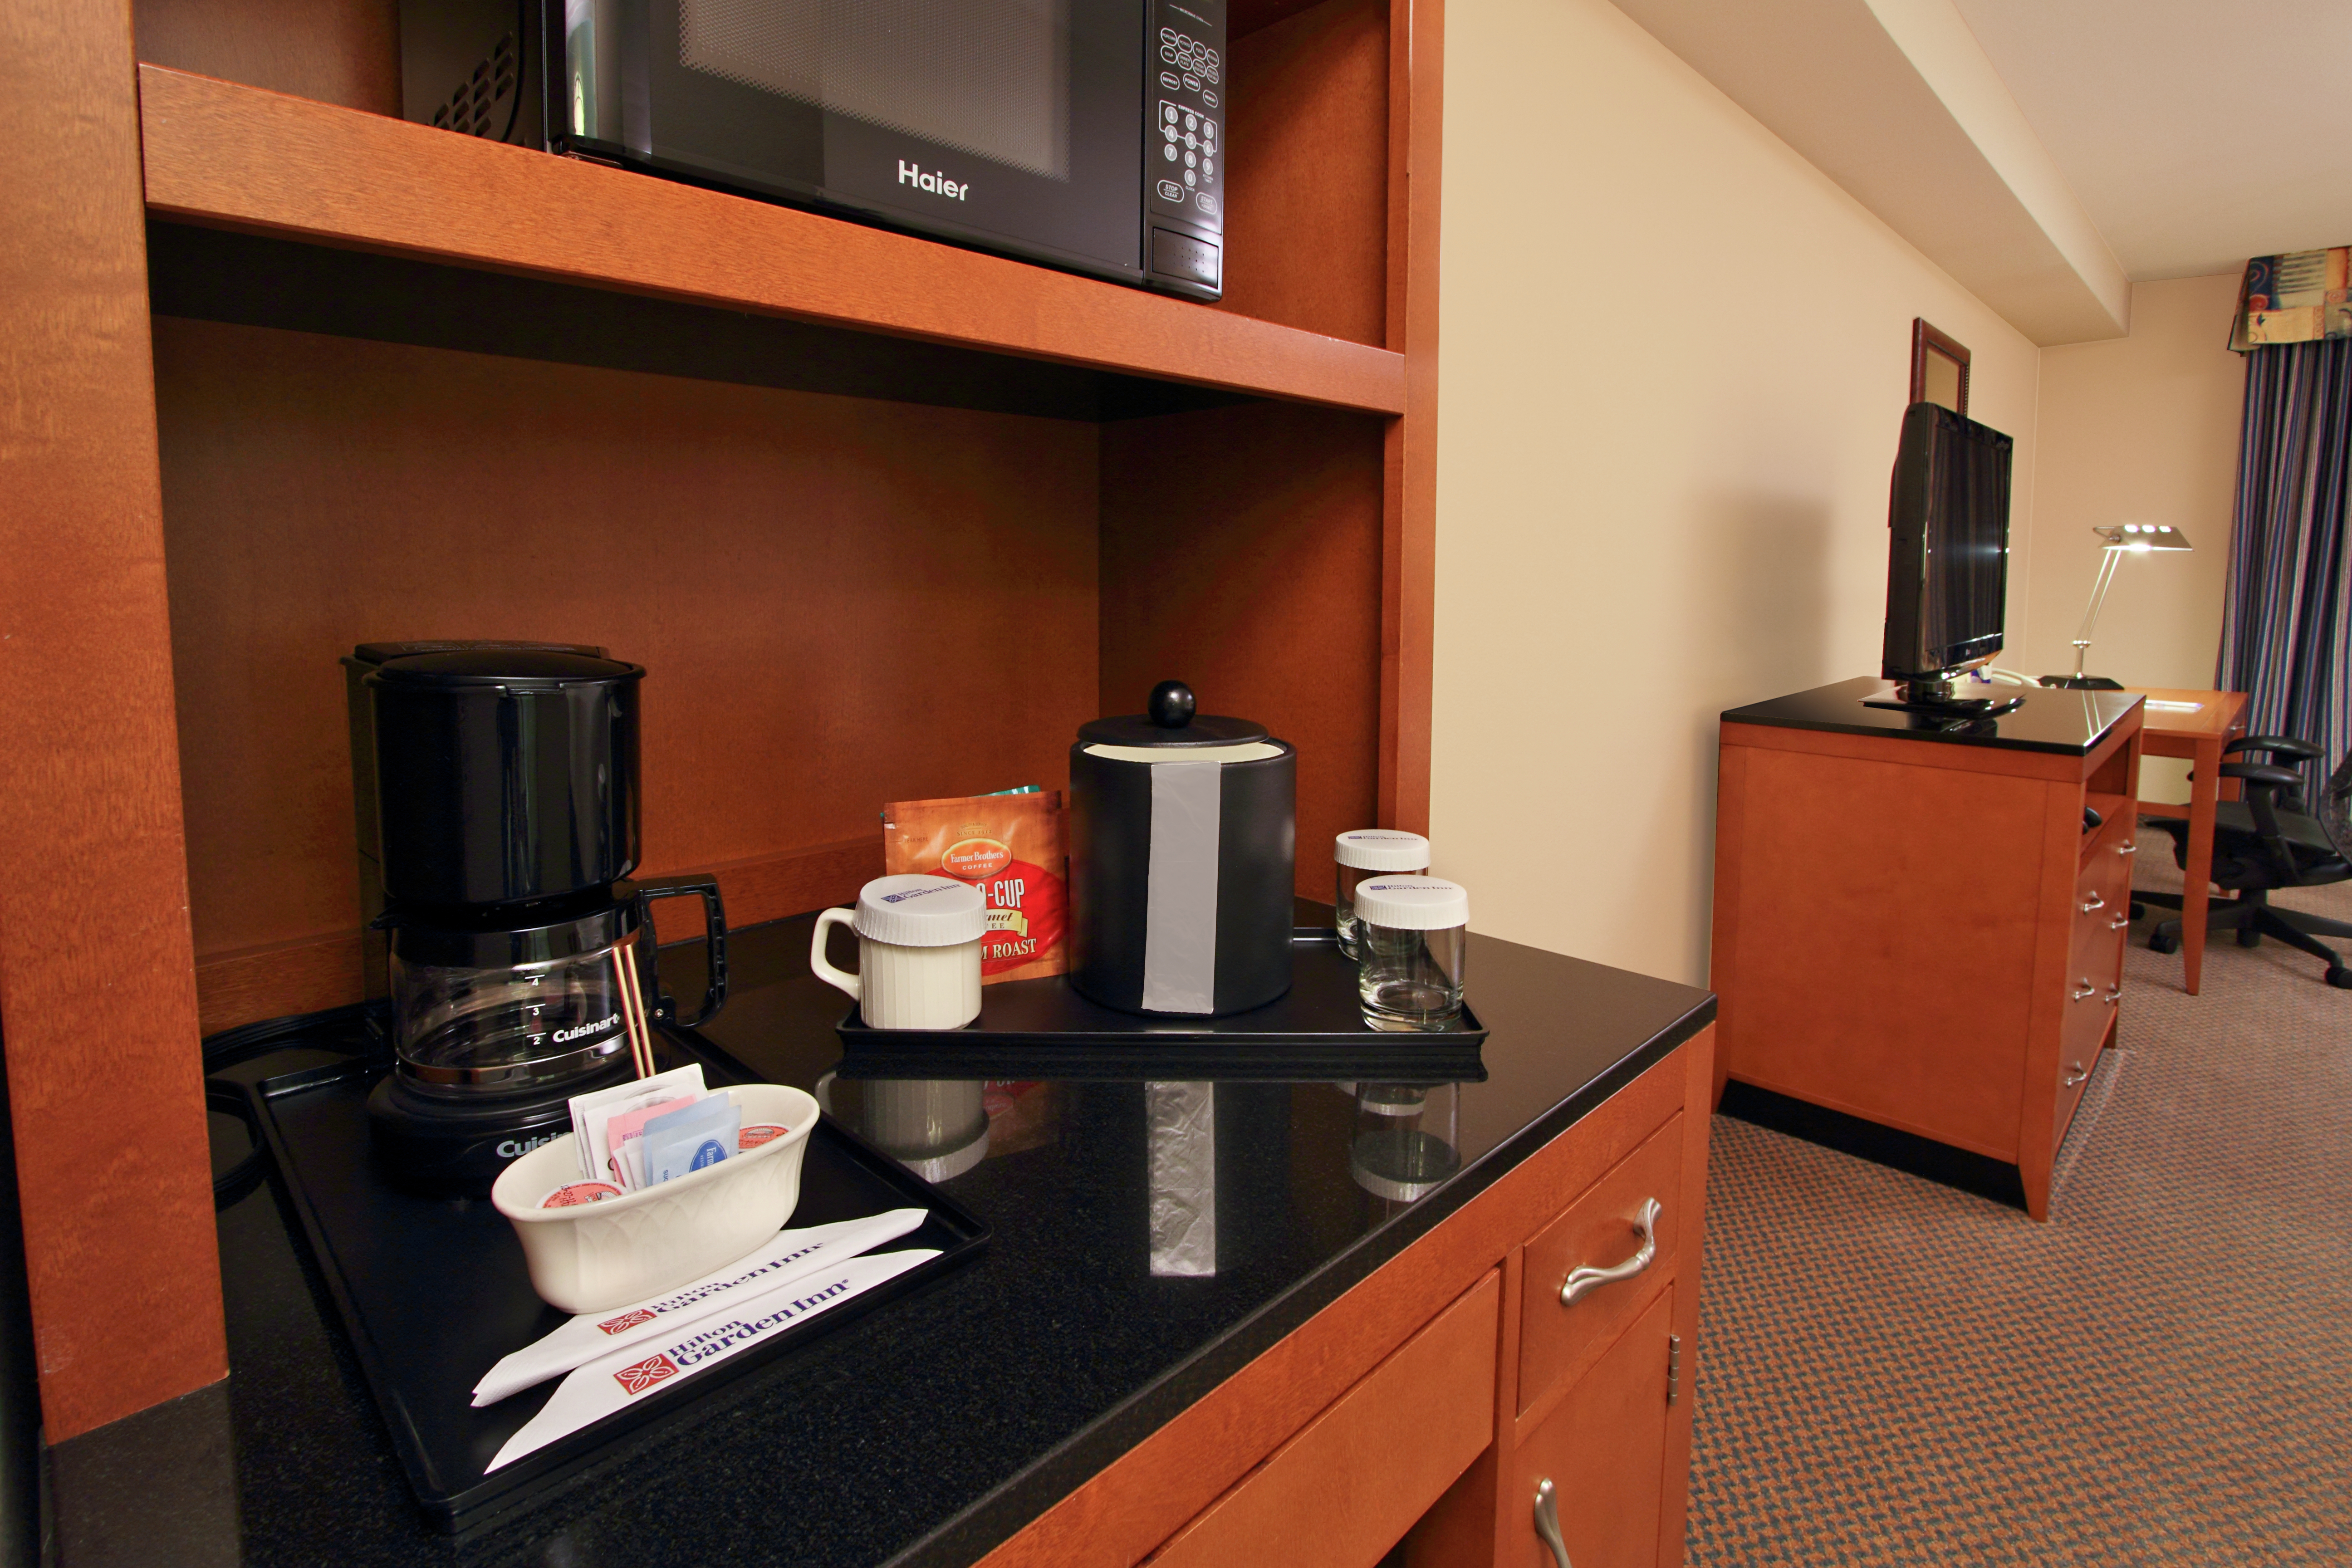 Guest Room Amenities and Television